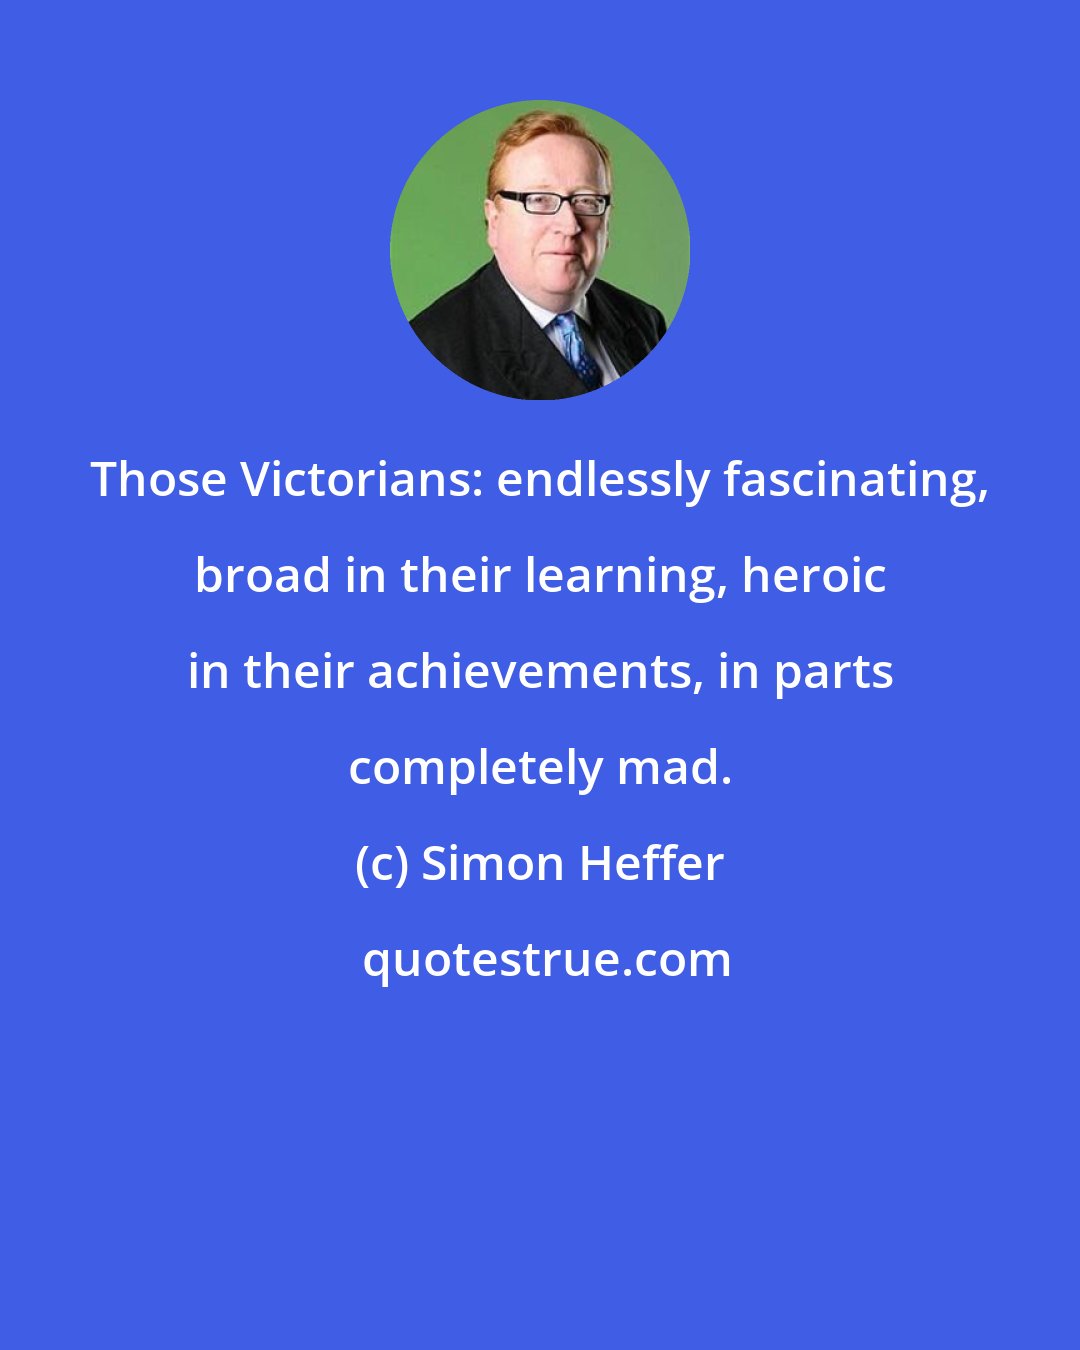 Simon Heffer: Those Victorians: endlessly fascinating, broad in their learning, heroic in their achievements, in parts completely mad.